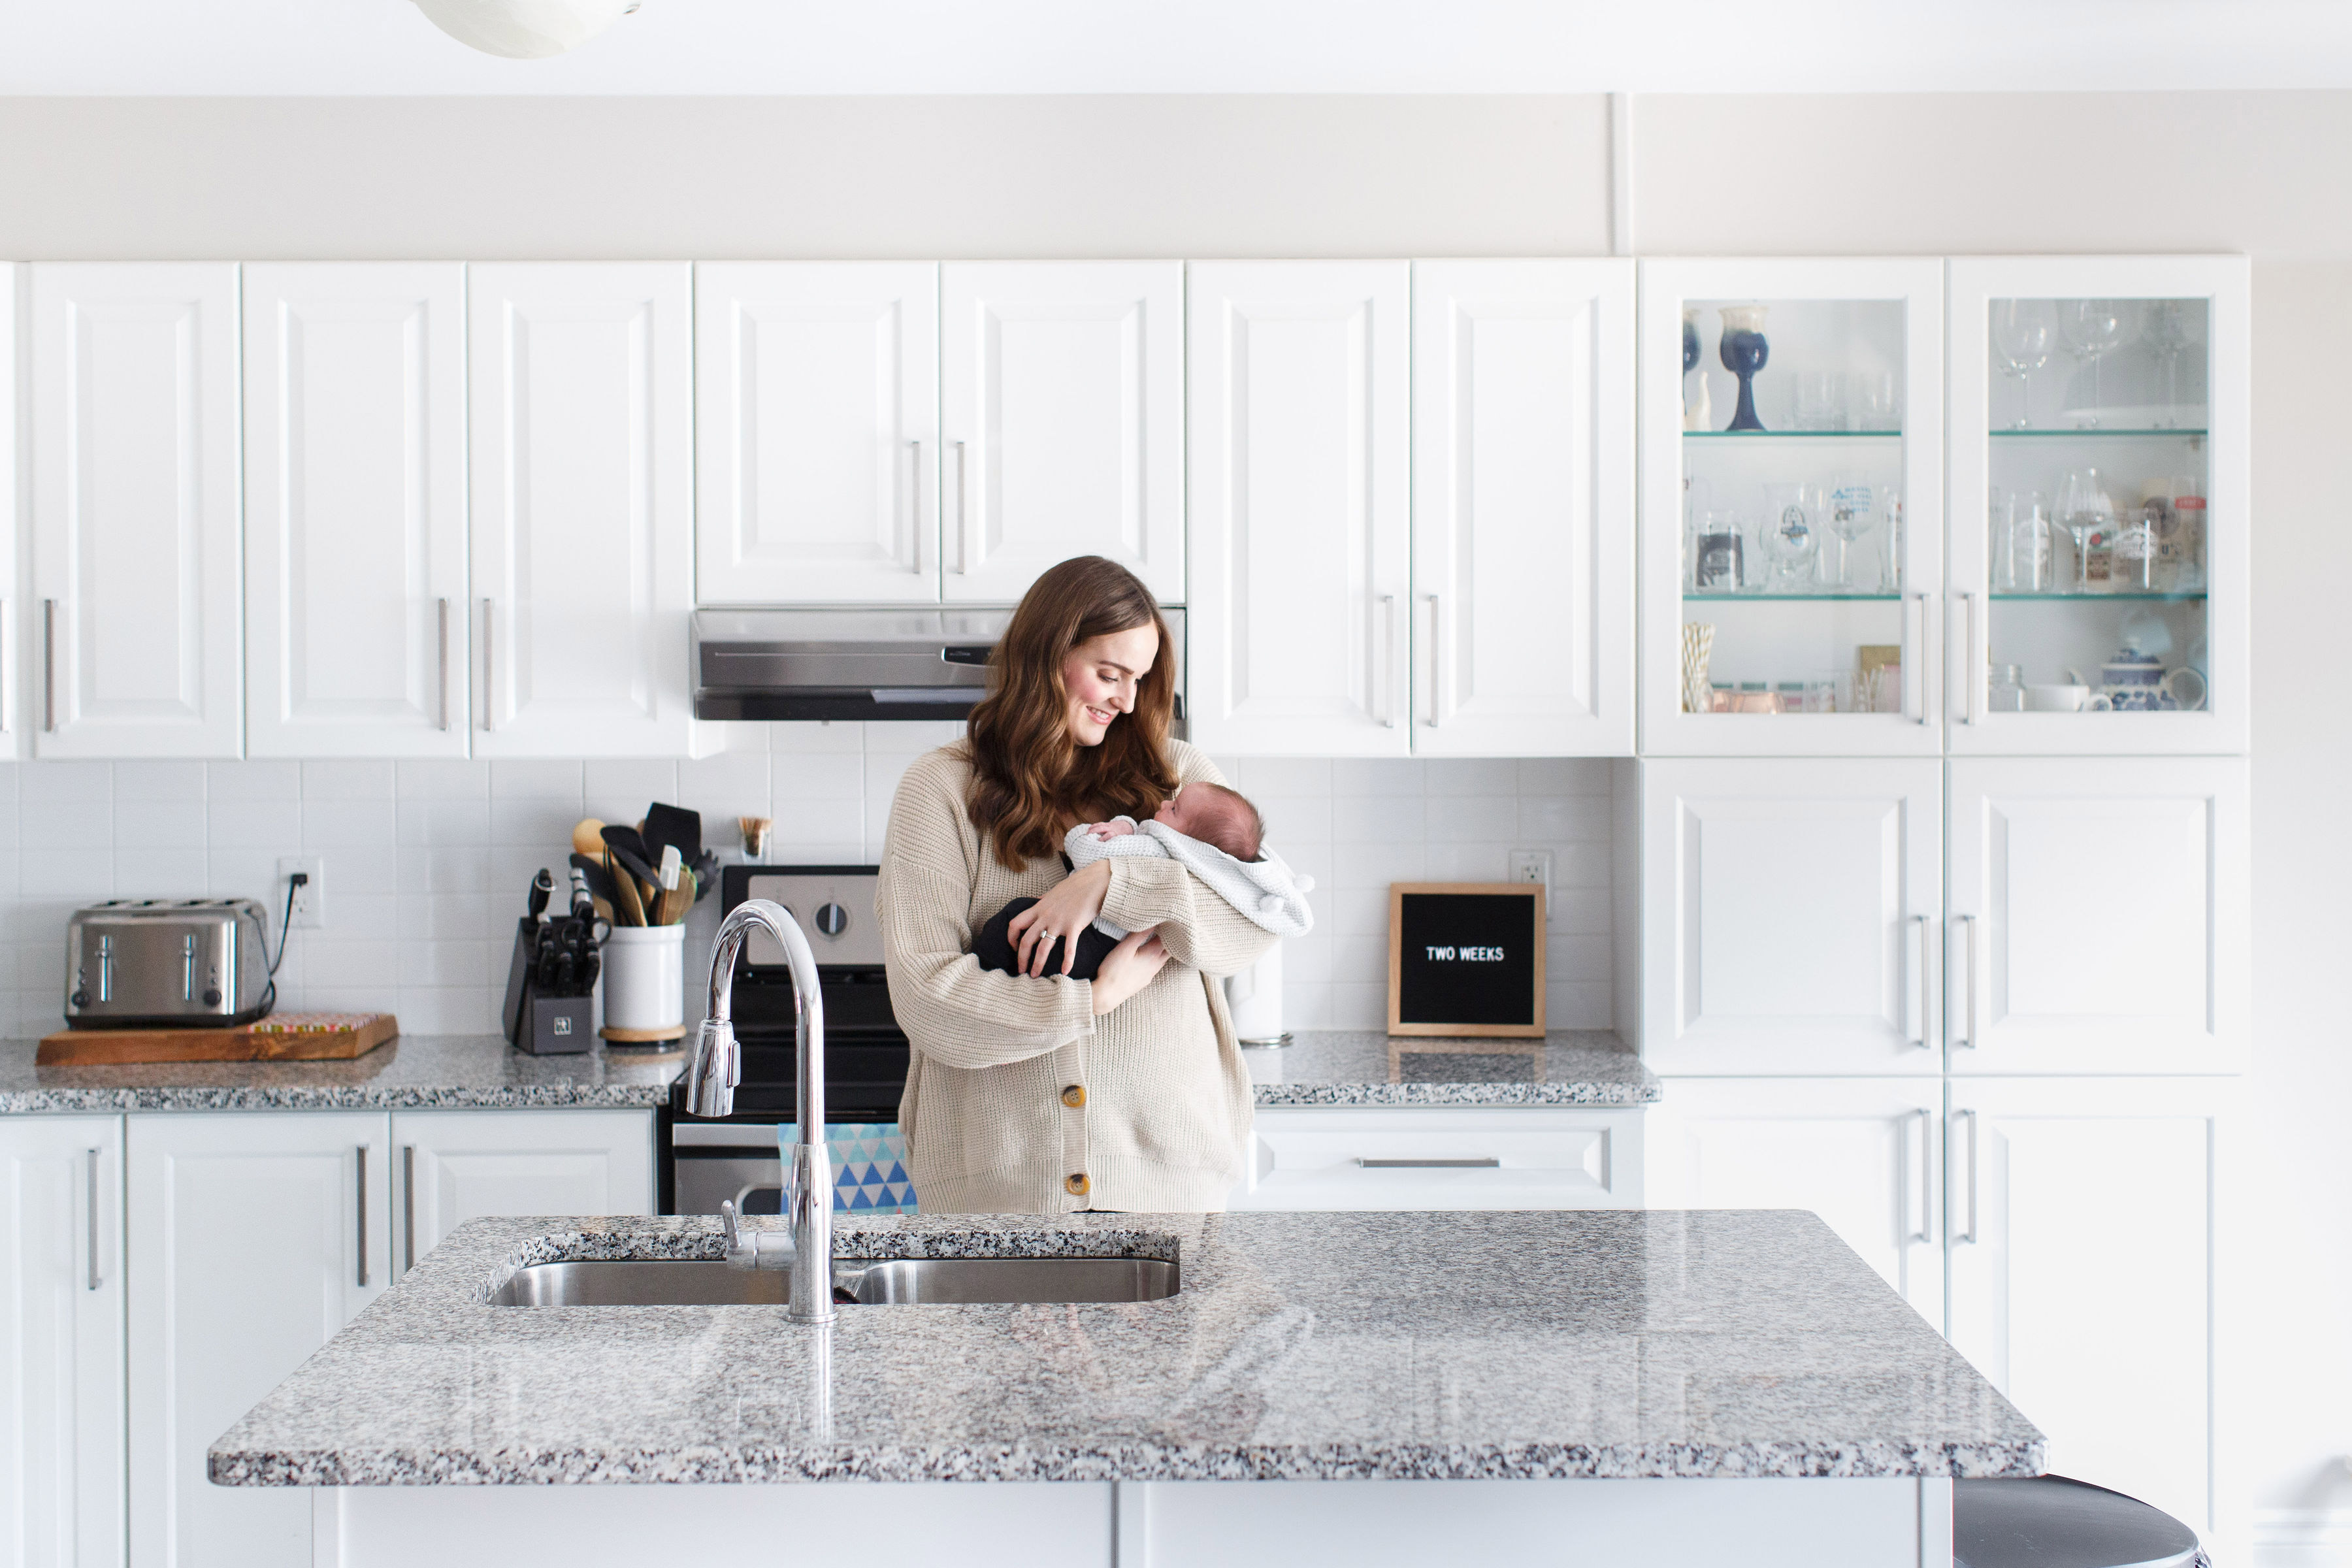 indoors intimate newborn photoshoot showing mom holding baby in kitchen